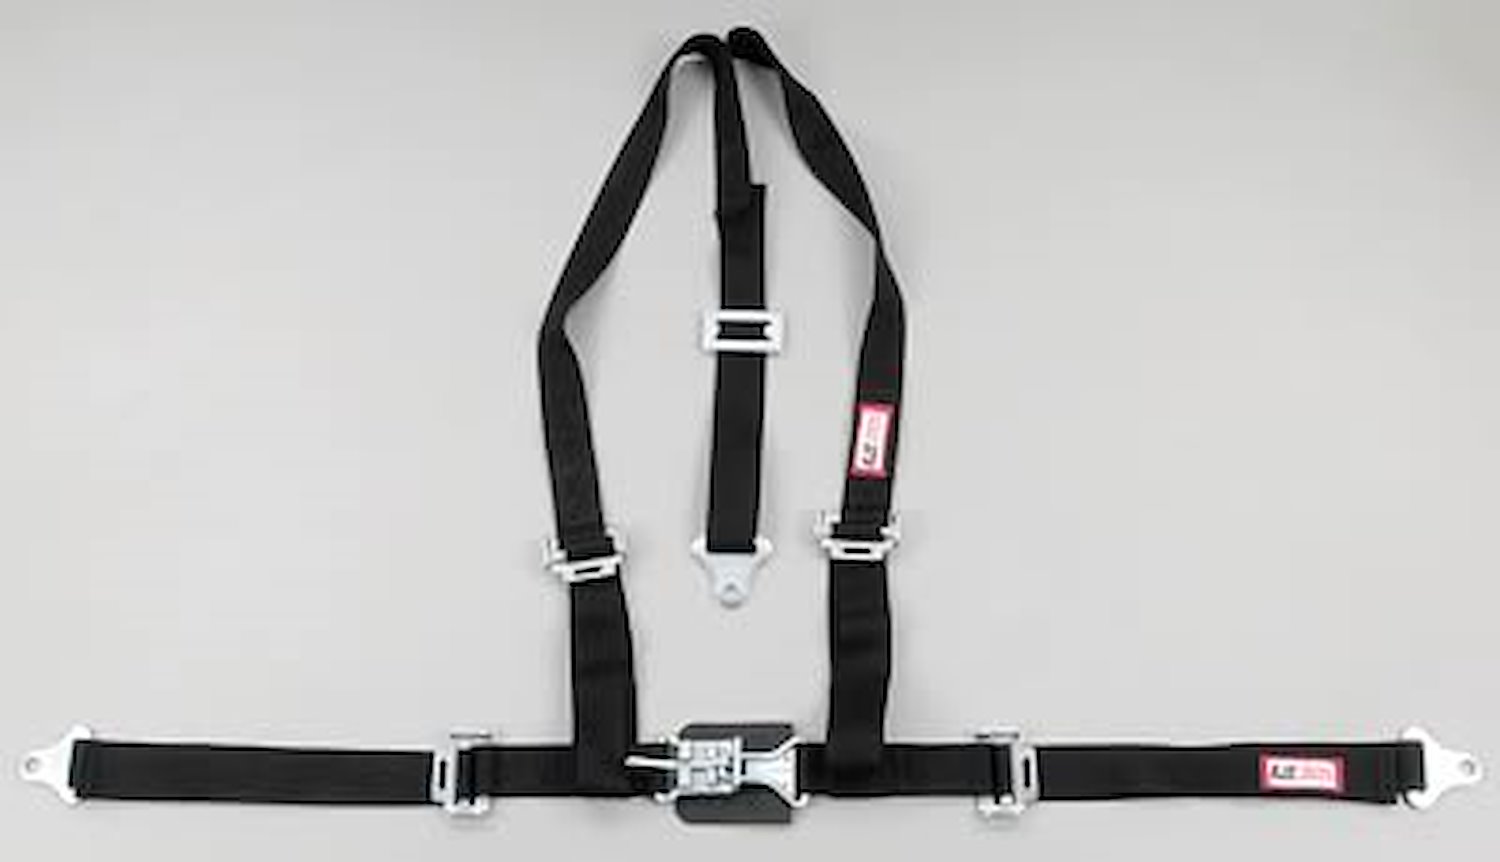 NON-SFI L&L HARNESS 3 PULL DOWN Lap Belt SEWN IN 2 S.H. Individual ROLL BAR Mount ALL WRAP ENDS RED